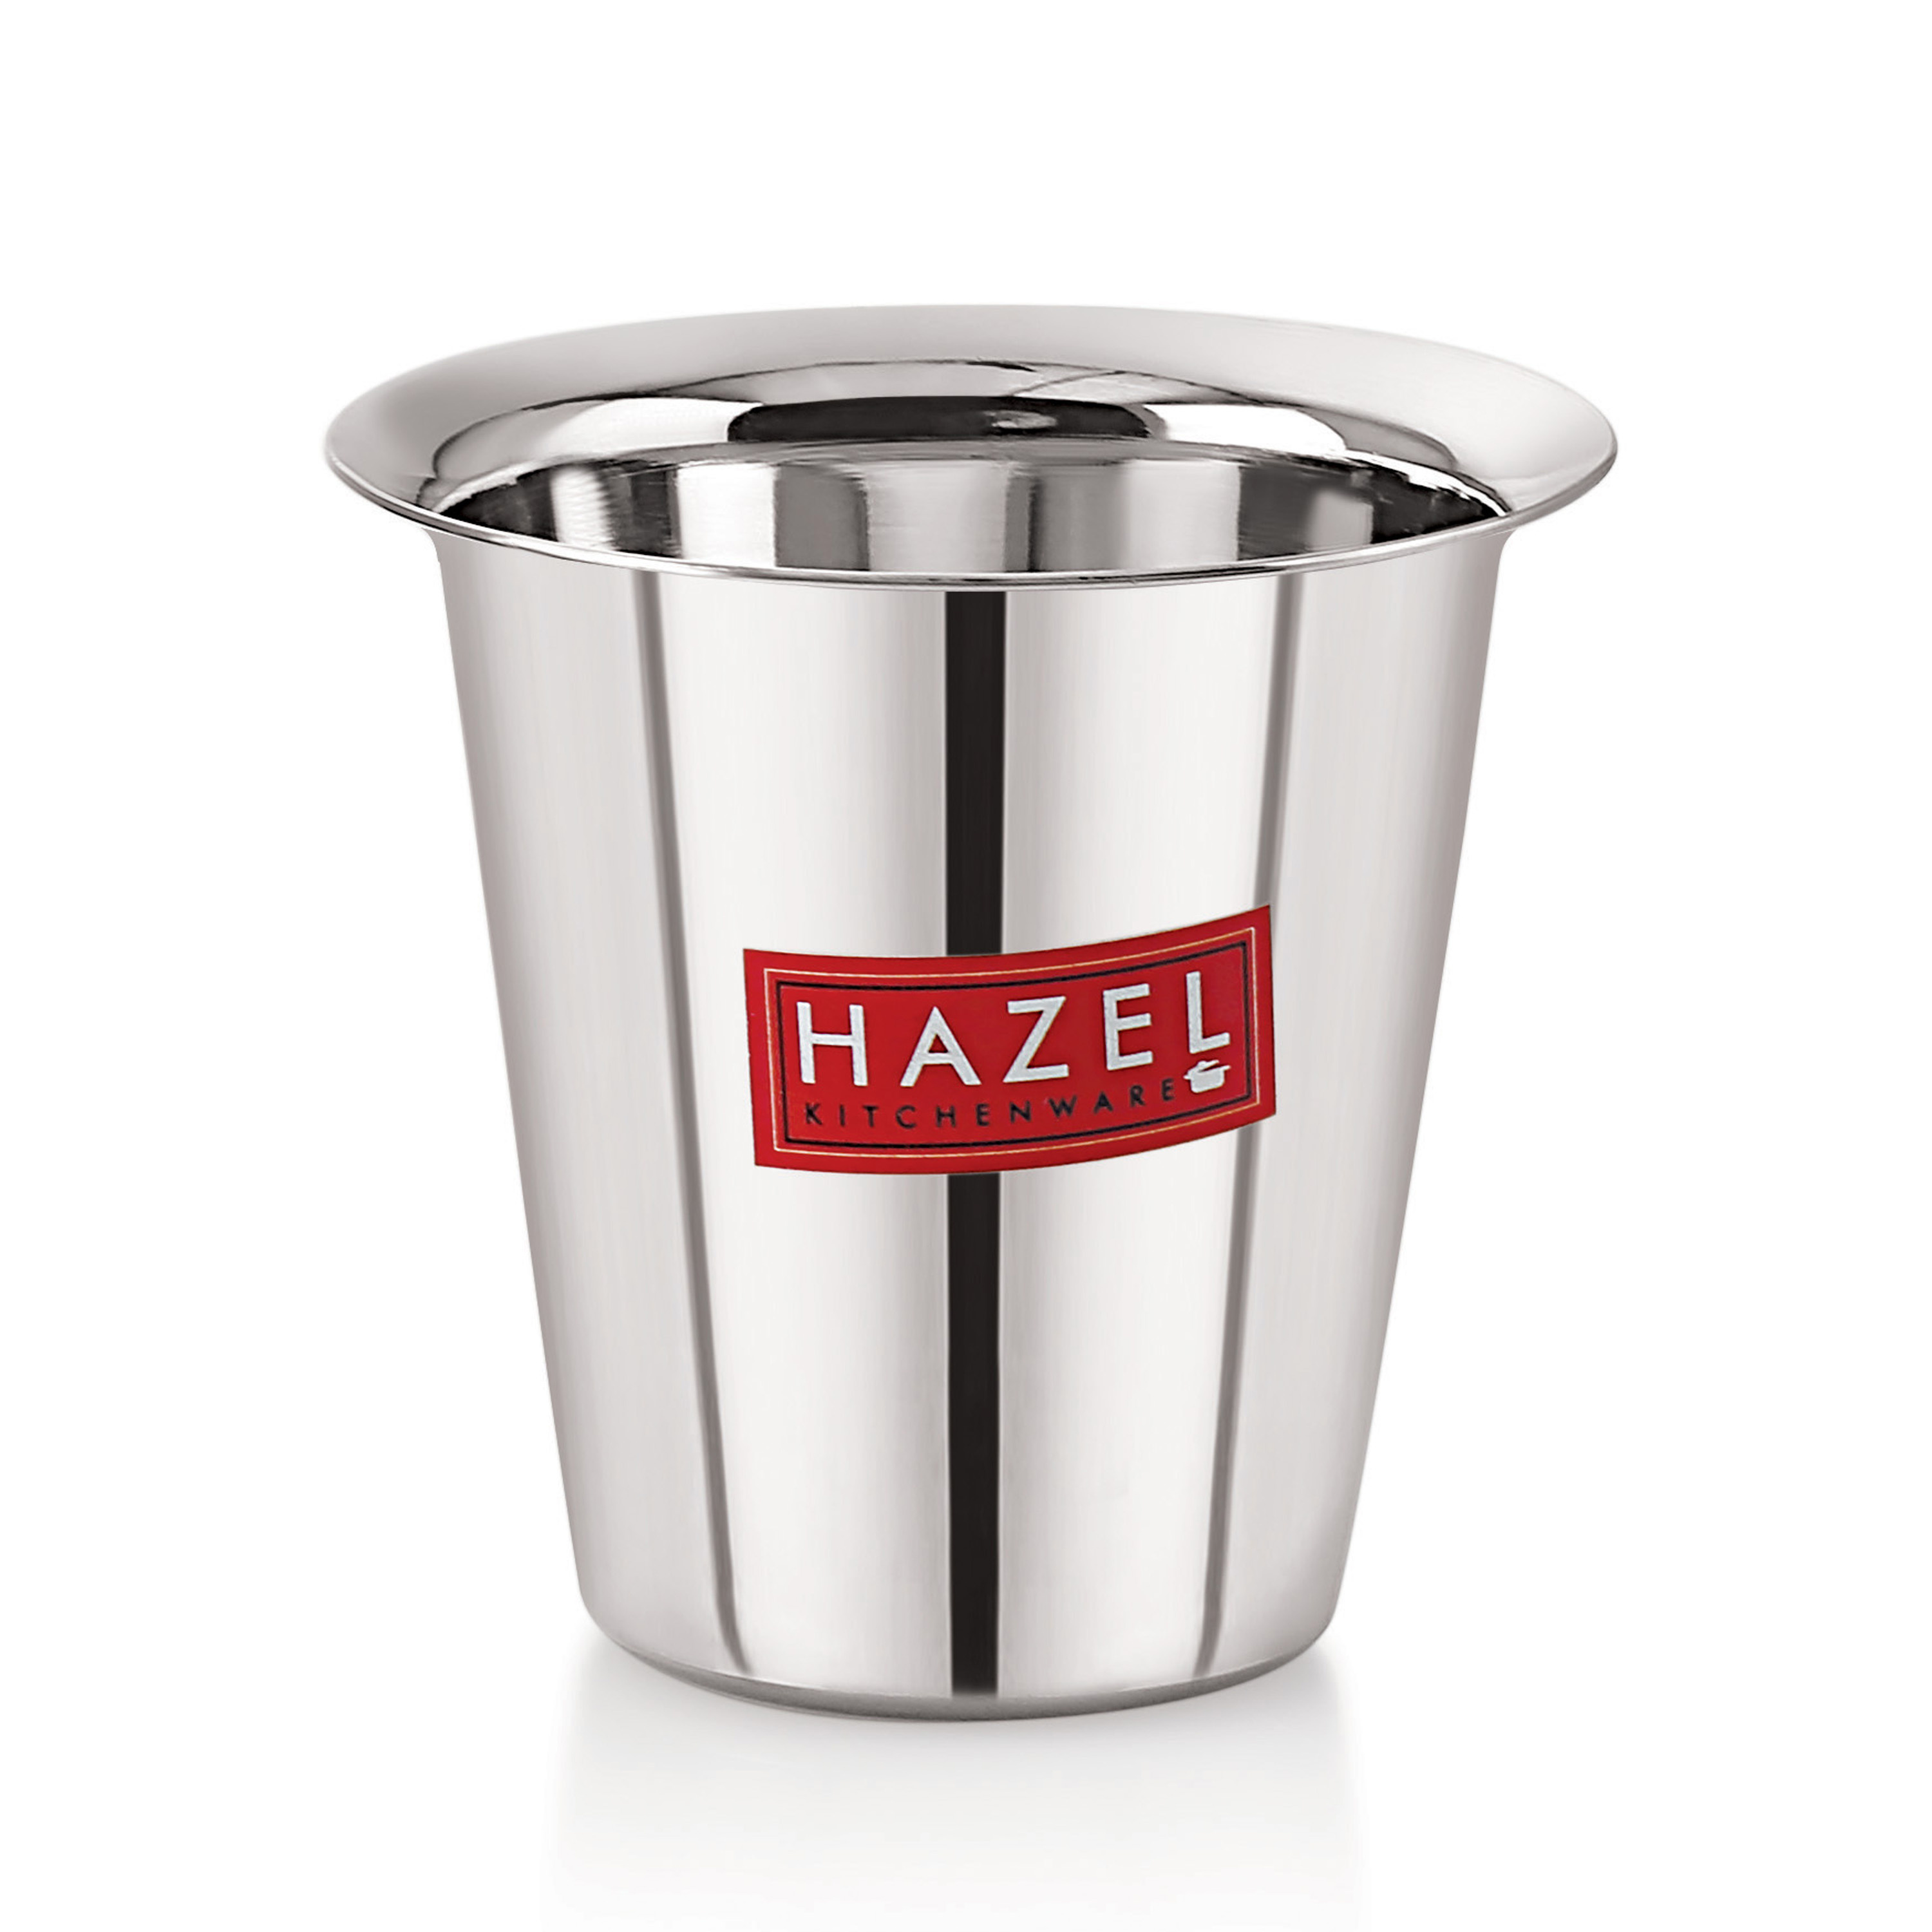 HAZEL Stainless Steel Tea Glasses Set of 1 | Unbreakable Drinking Glasses with Glossy Finish, 200 ML